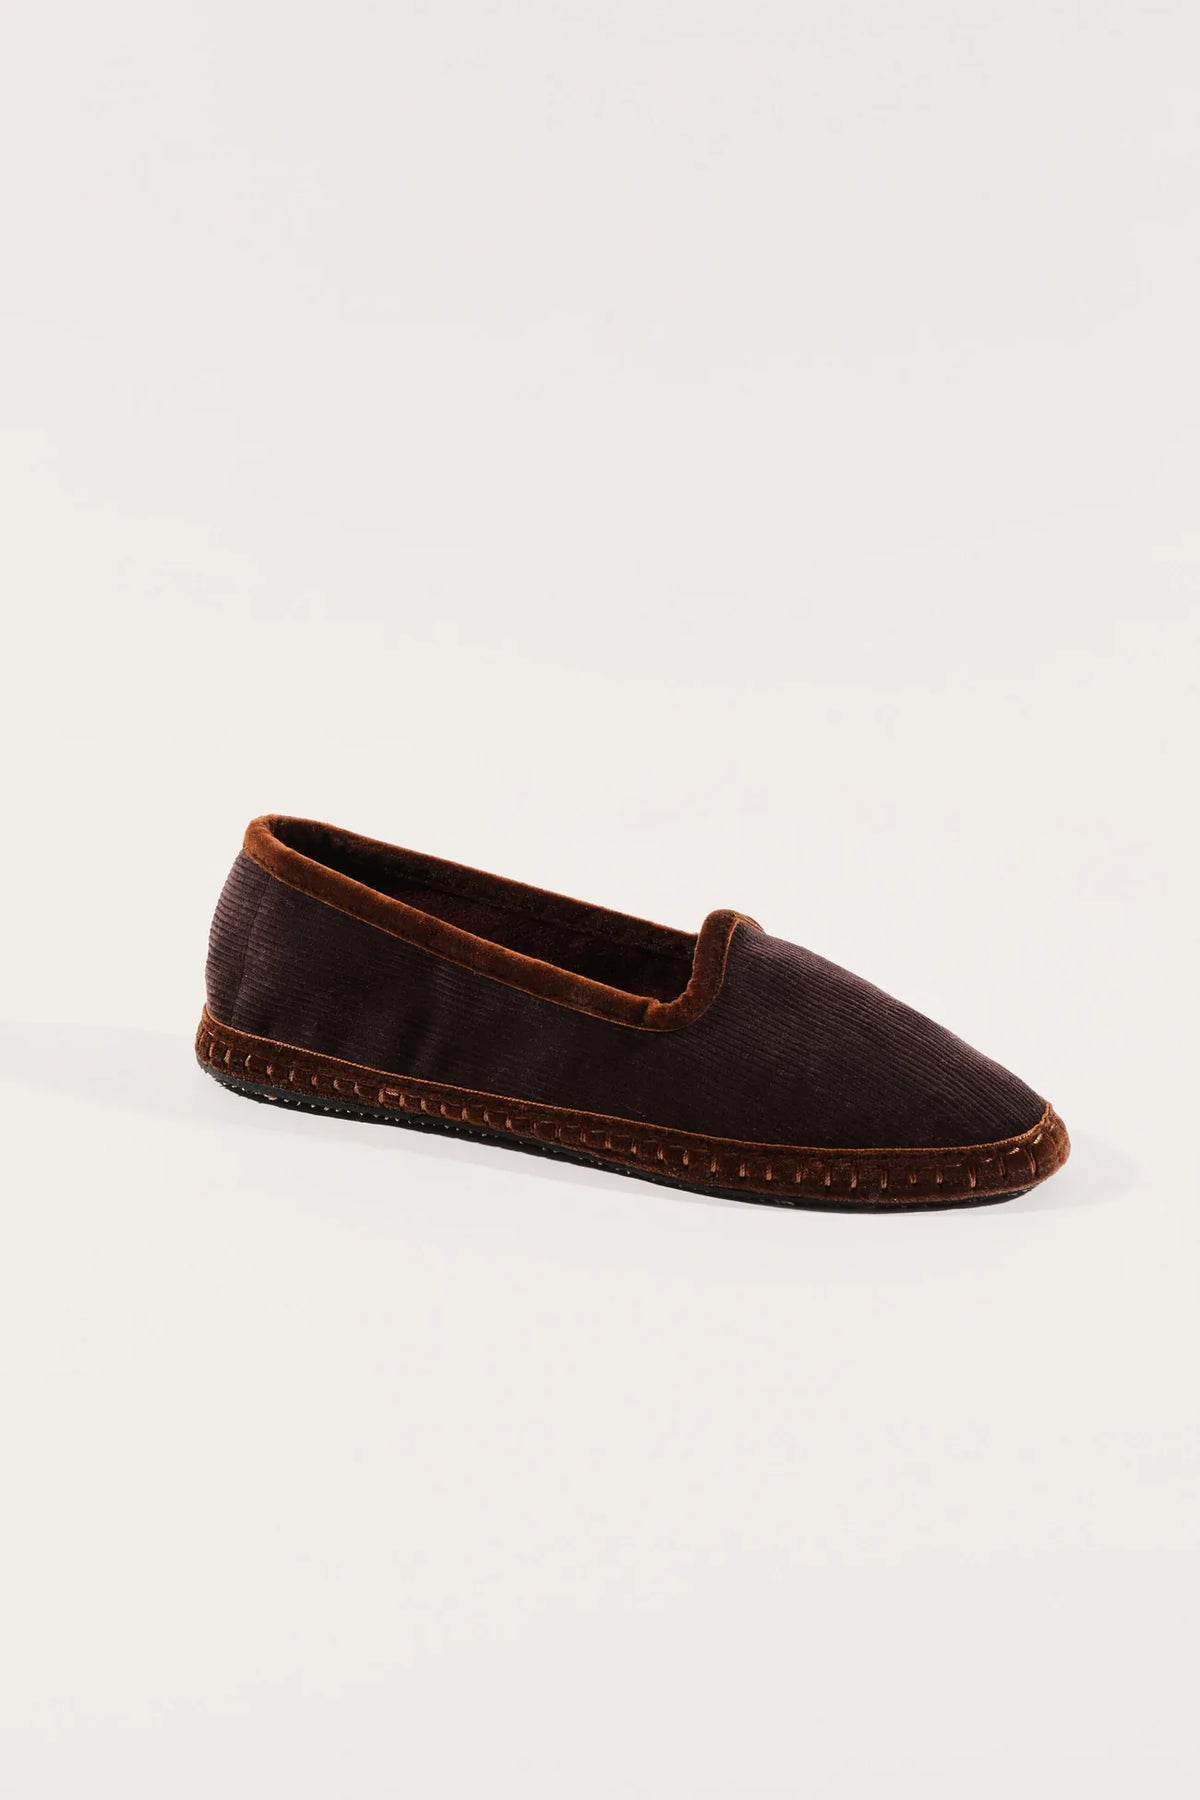 TOBY FLAT SHOES